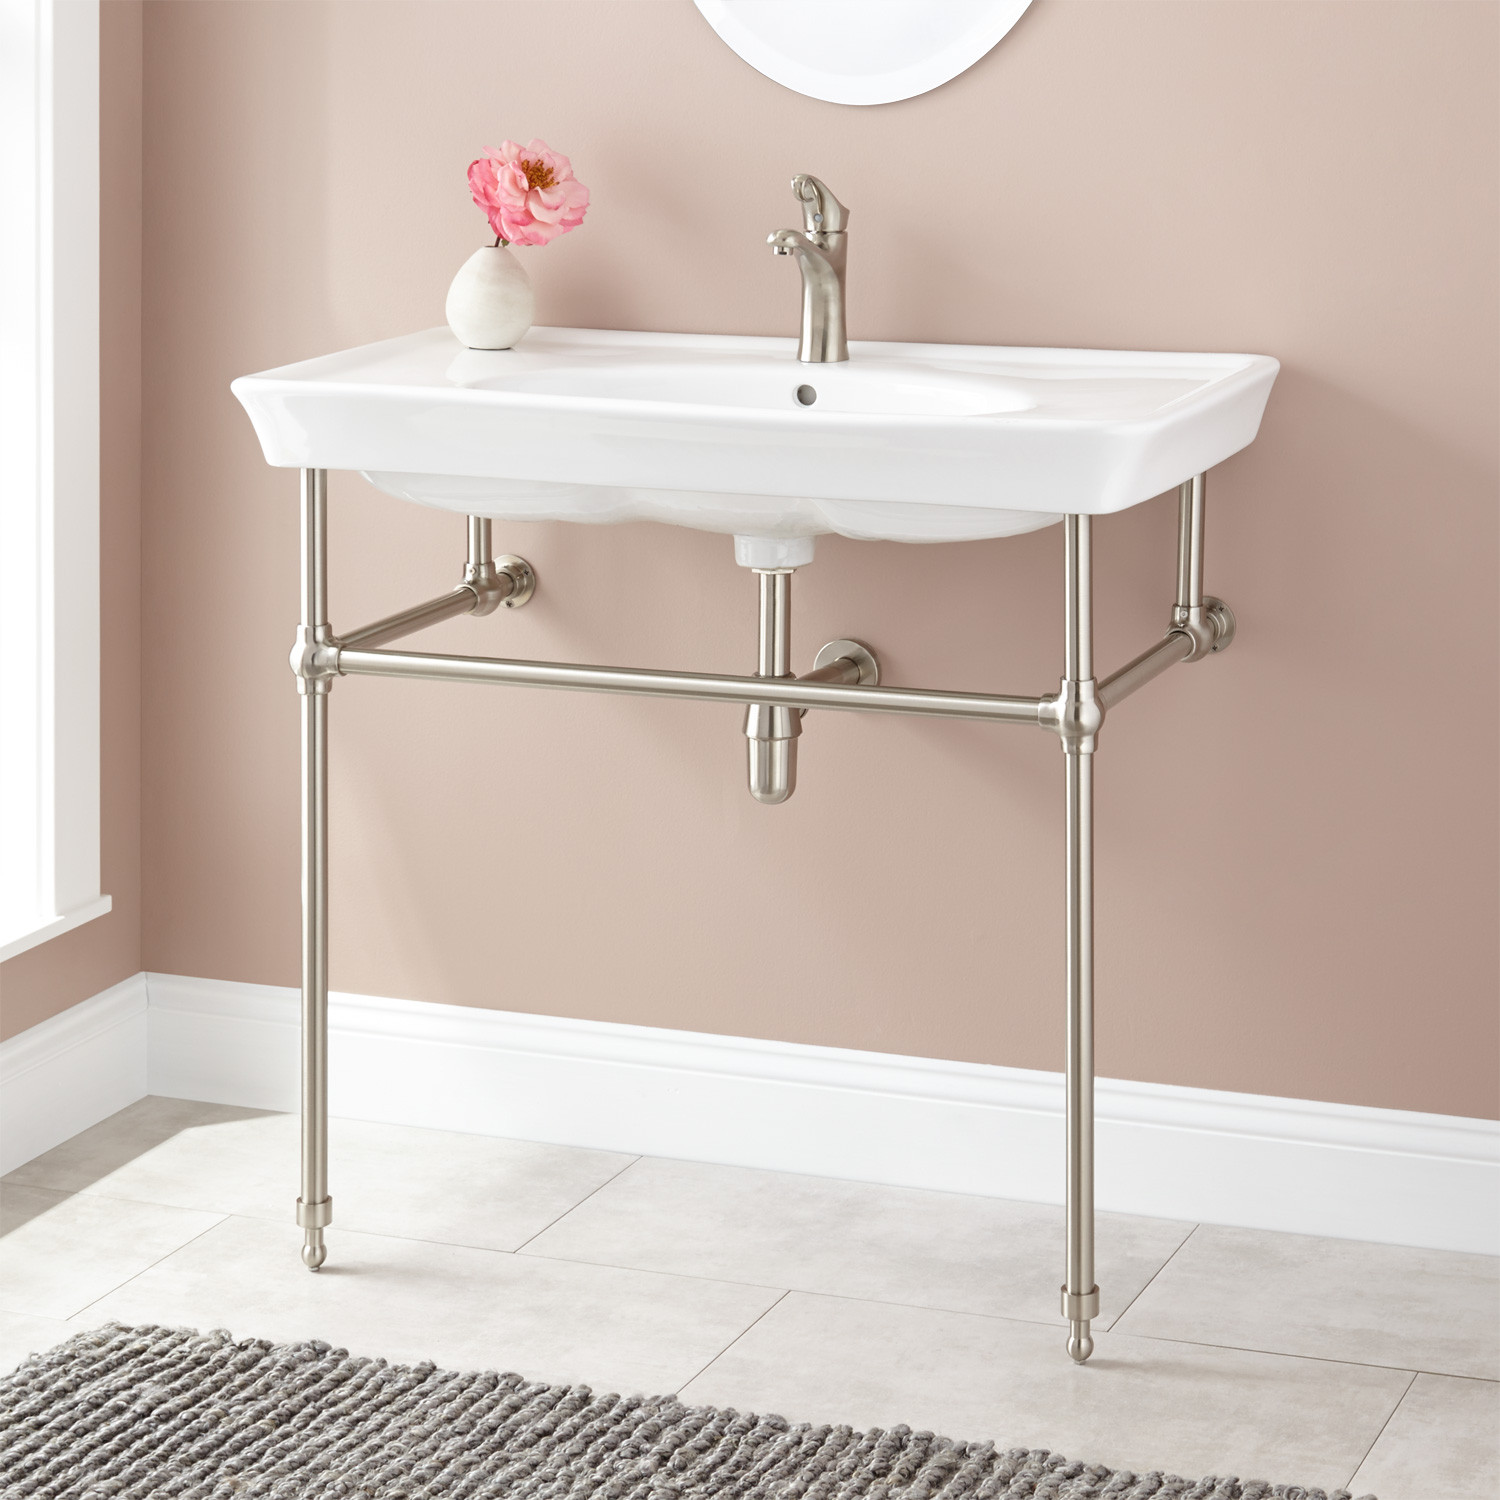 Console Sink Bathroom
 Bathroom Console Sink For Unique Free Standing Sink